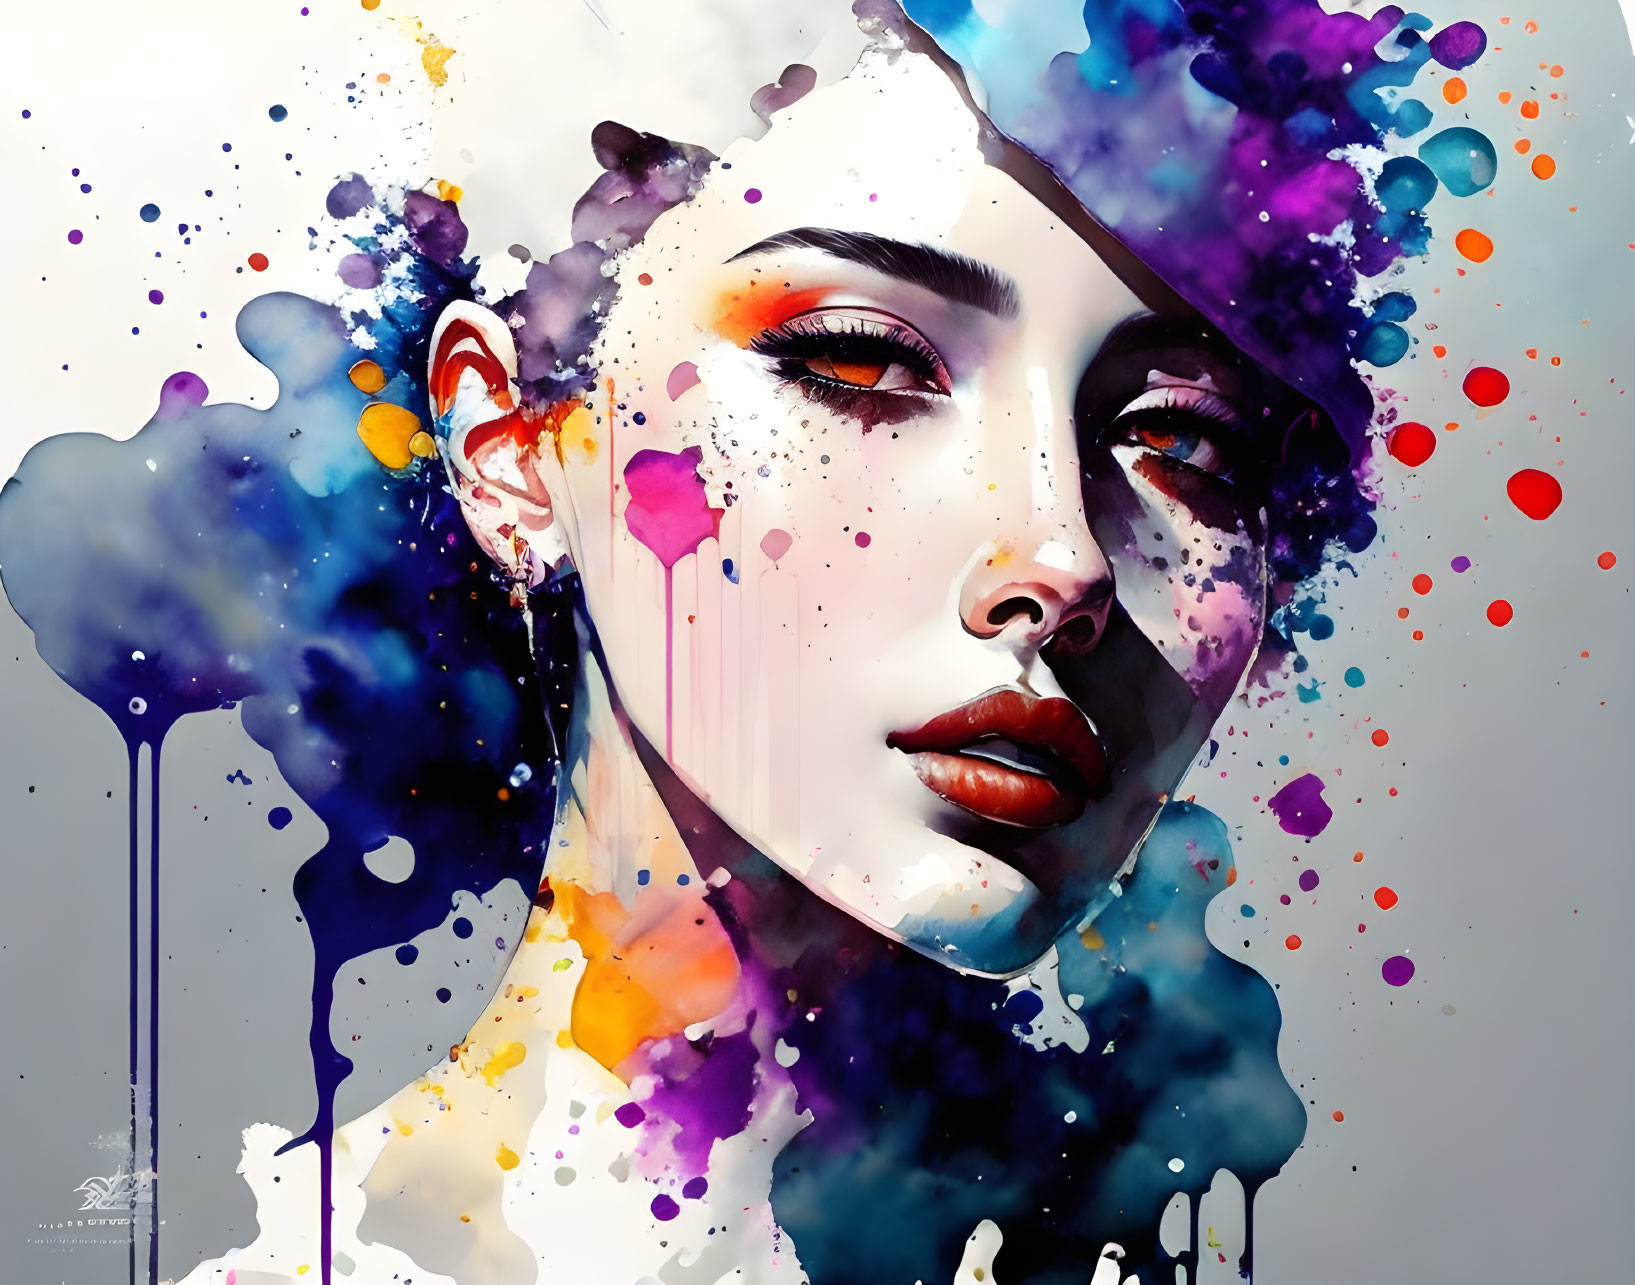 Colorful Watercolor Illustration of Woman with Abstract Features